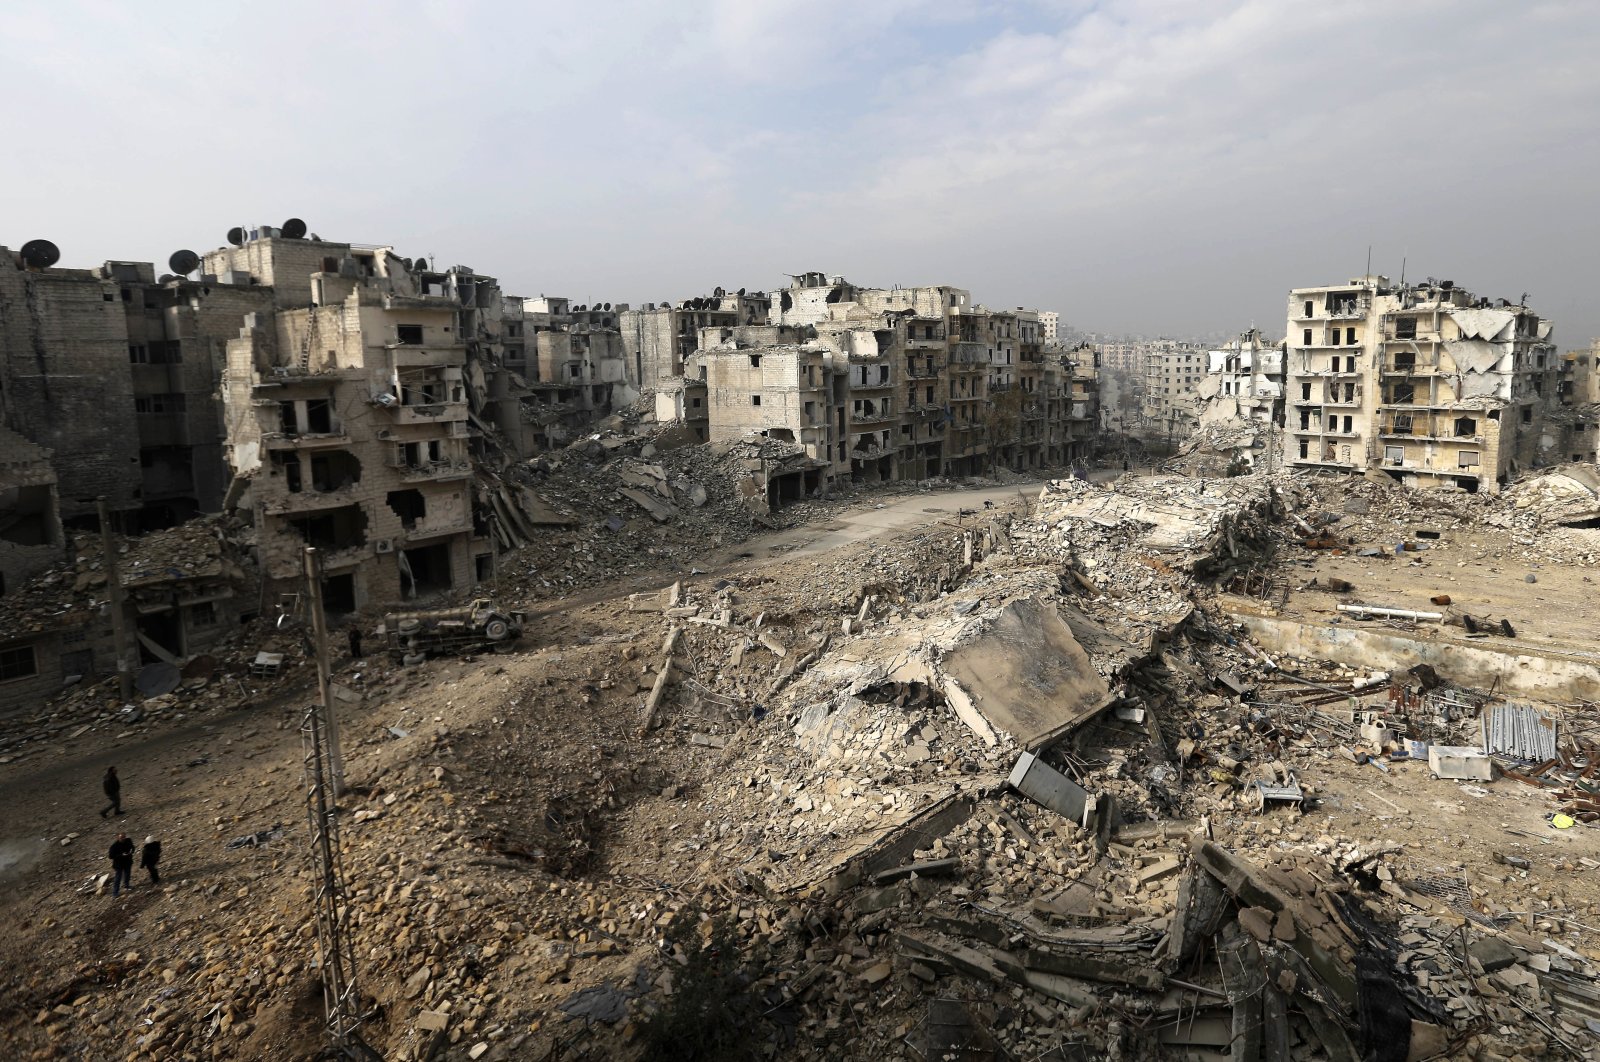 In this picture taken from the balcony of the Abdul-Hamid Khatib home, people walk through mounds of rubble that used to be high rise apartment buildings in the once opposition-held Ansari neighborhood in the eastern Aleppo, Syria, Friday, Jan. 20, 2017. (AP Photo)